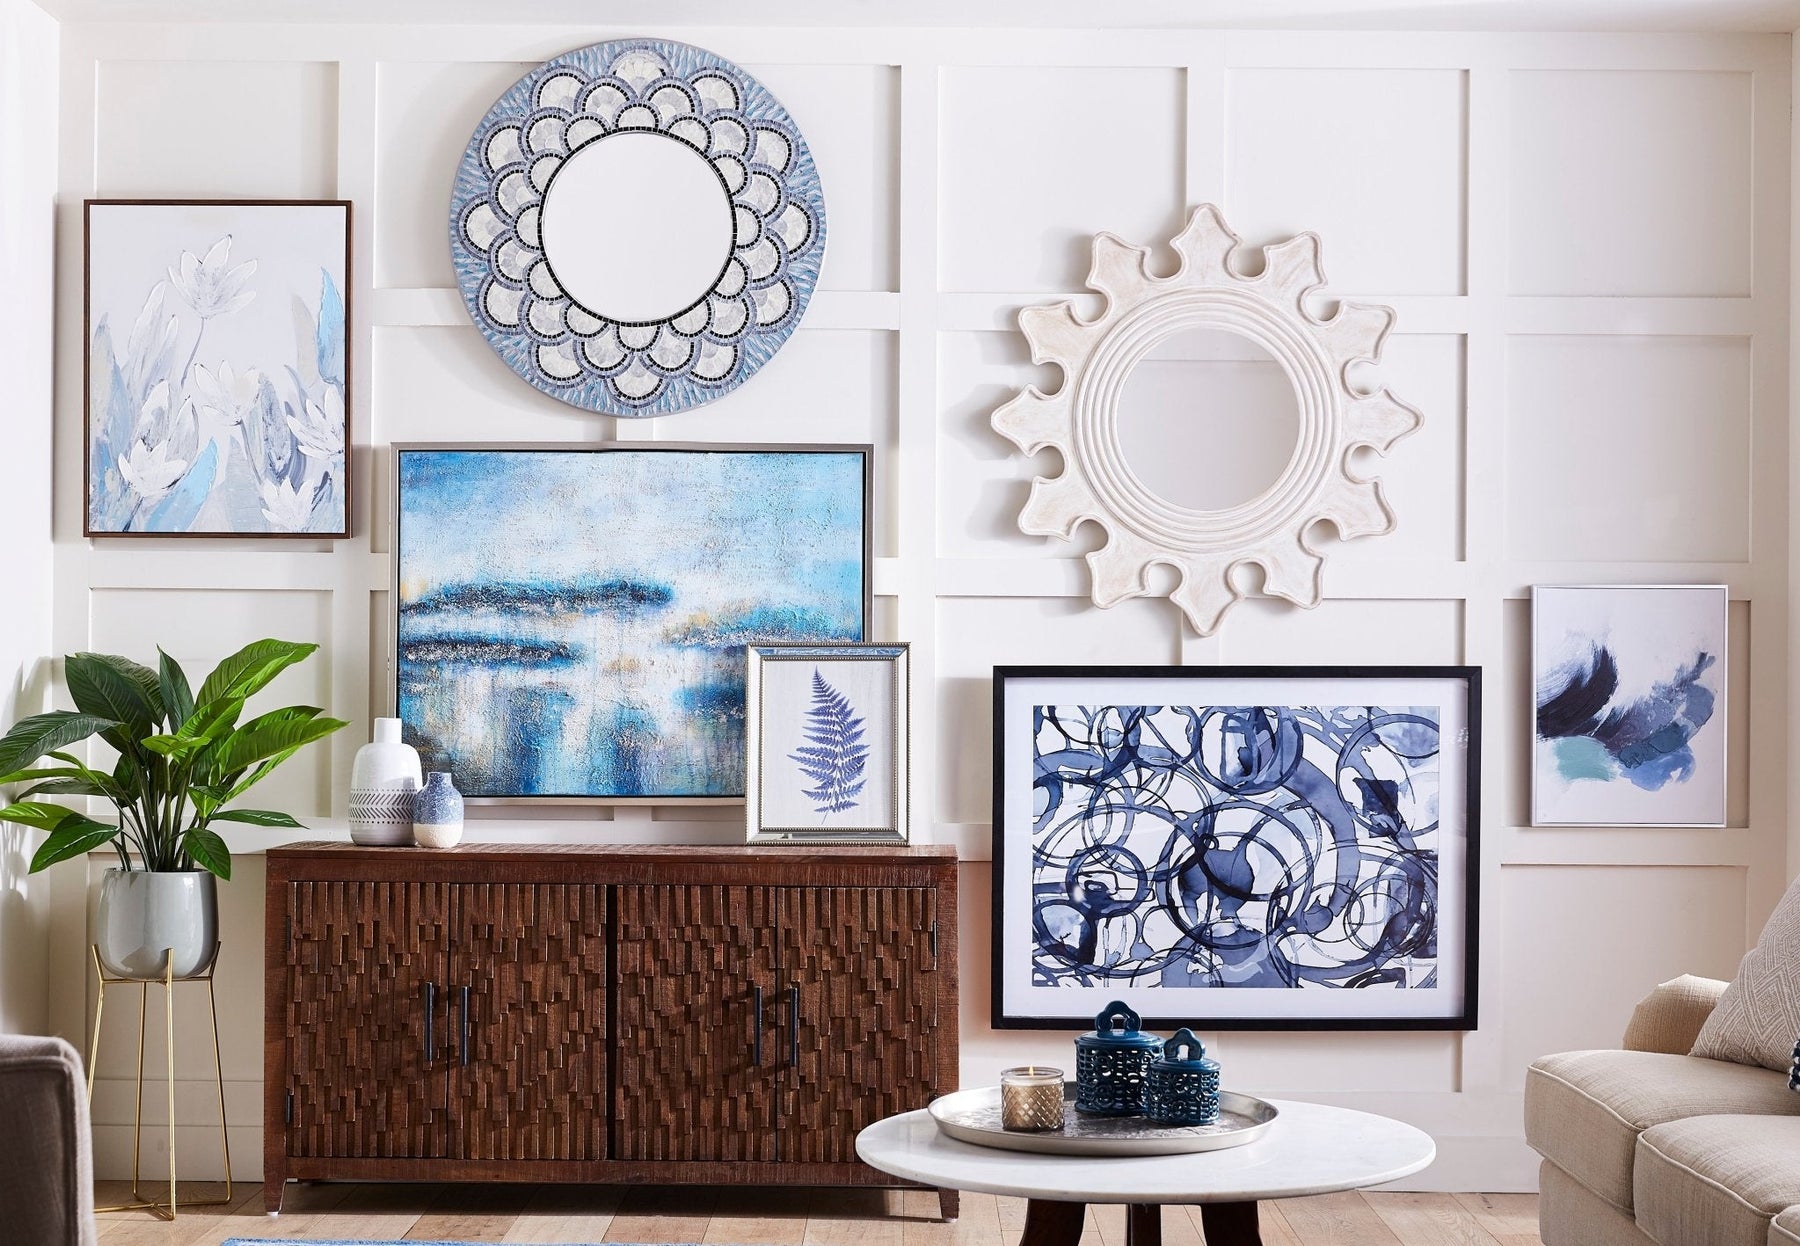 How to Style an Entryway Gallery Wall - Pier 1